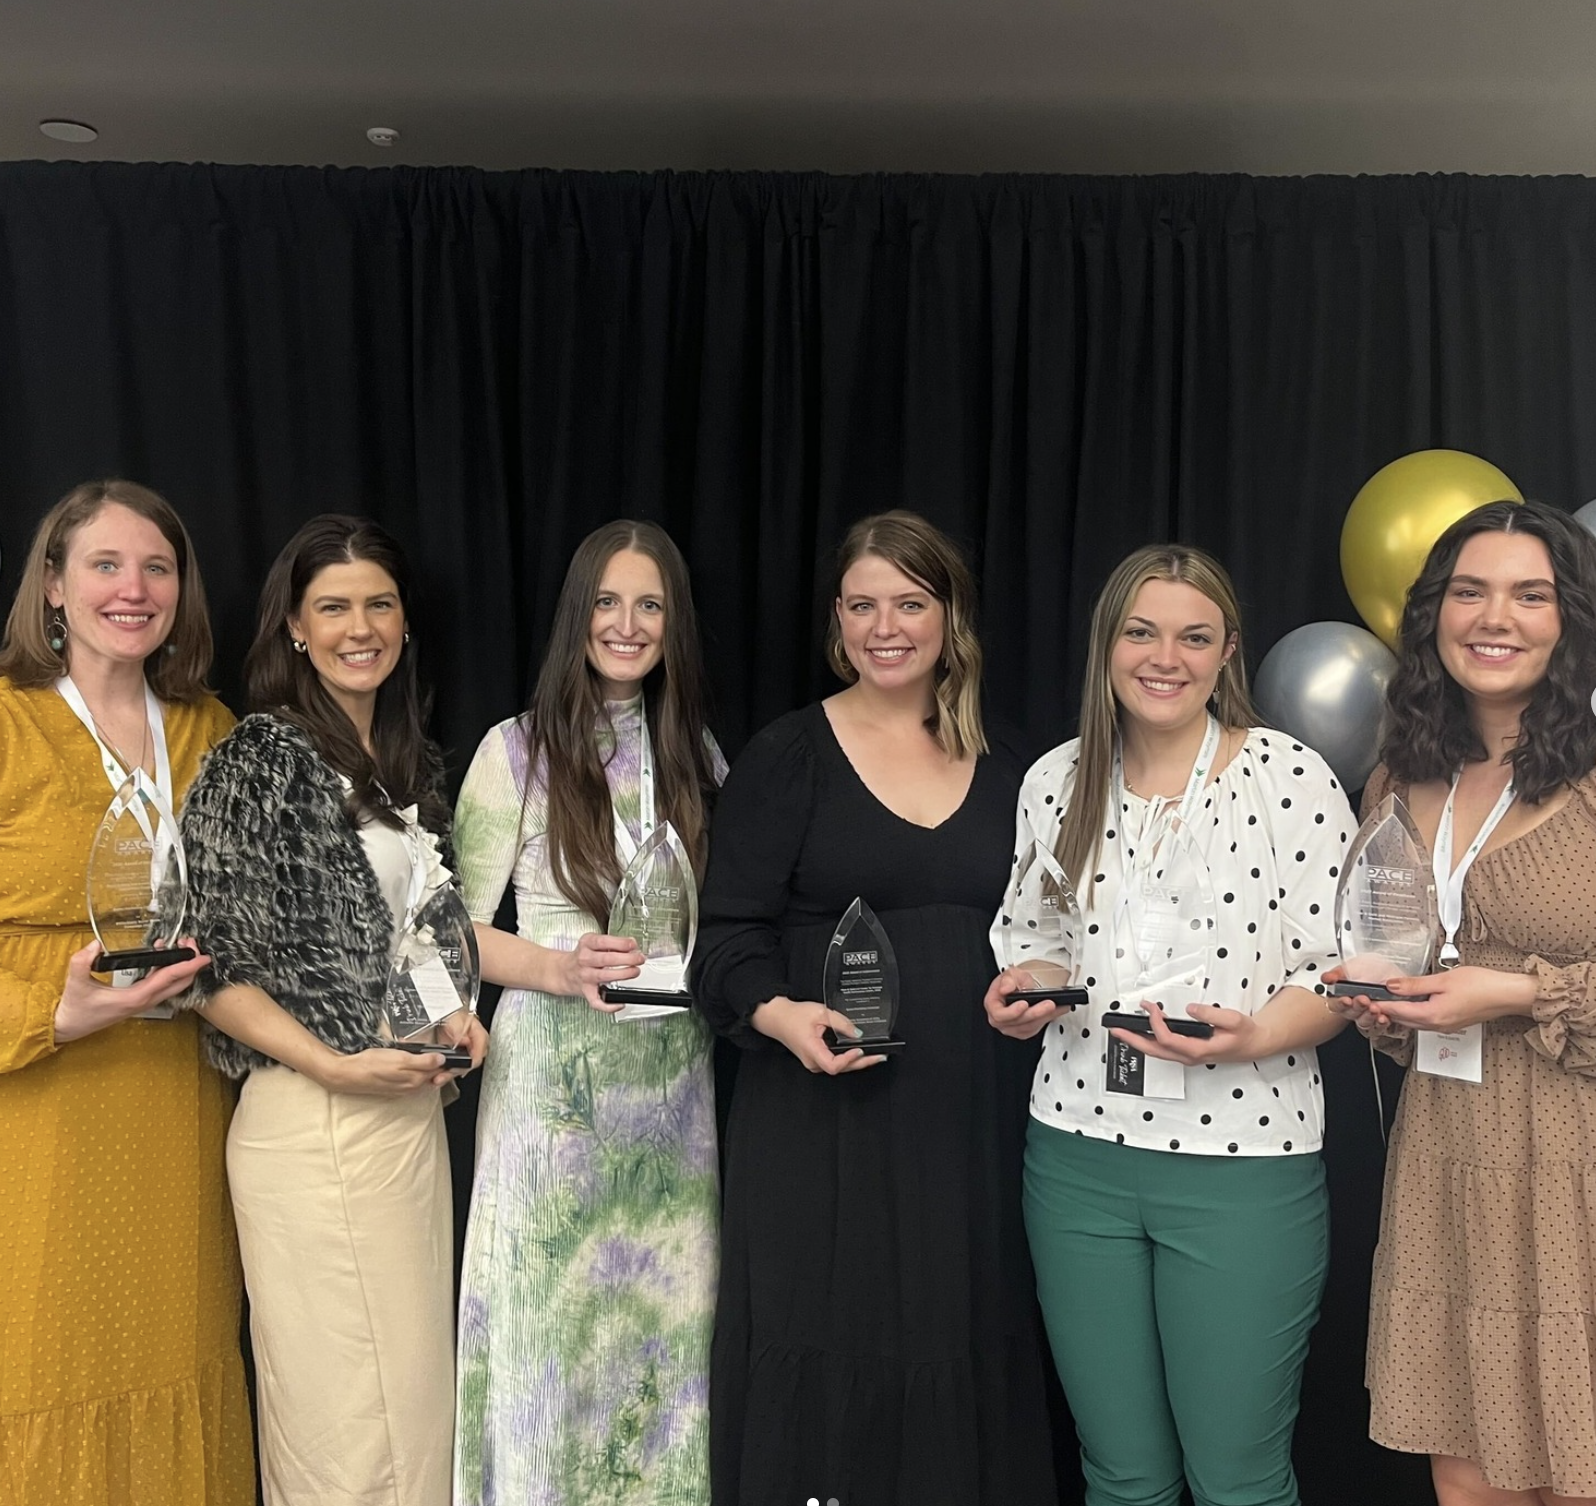 The P&G team with their winning PACE Awards. This is mid-Michigan’s highest honor of public relations awarded annually to practitioners who have successfully addressed a contemporary issue with exemplary professional skill, creativity and resourcefulness.